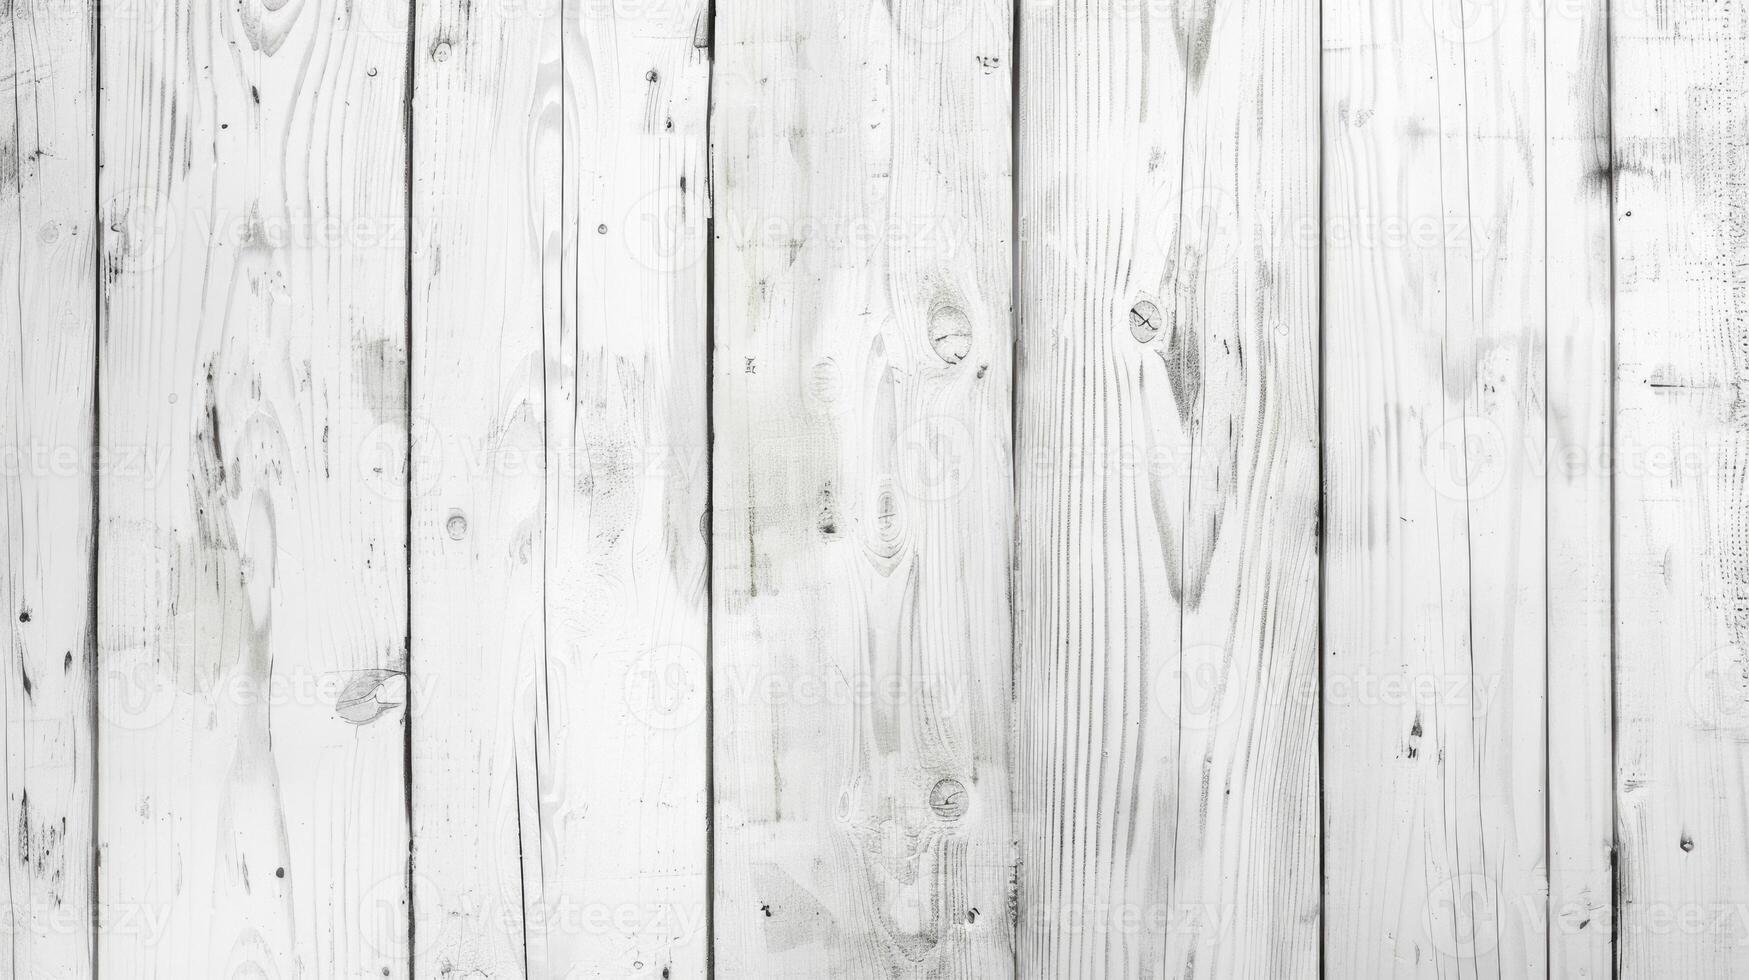 White wood texture backgrounds for design projects. photo